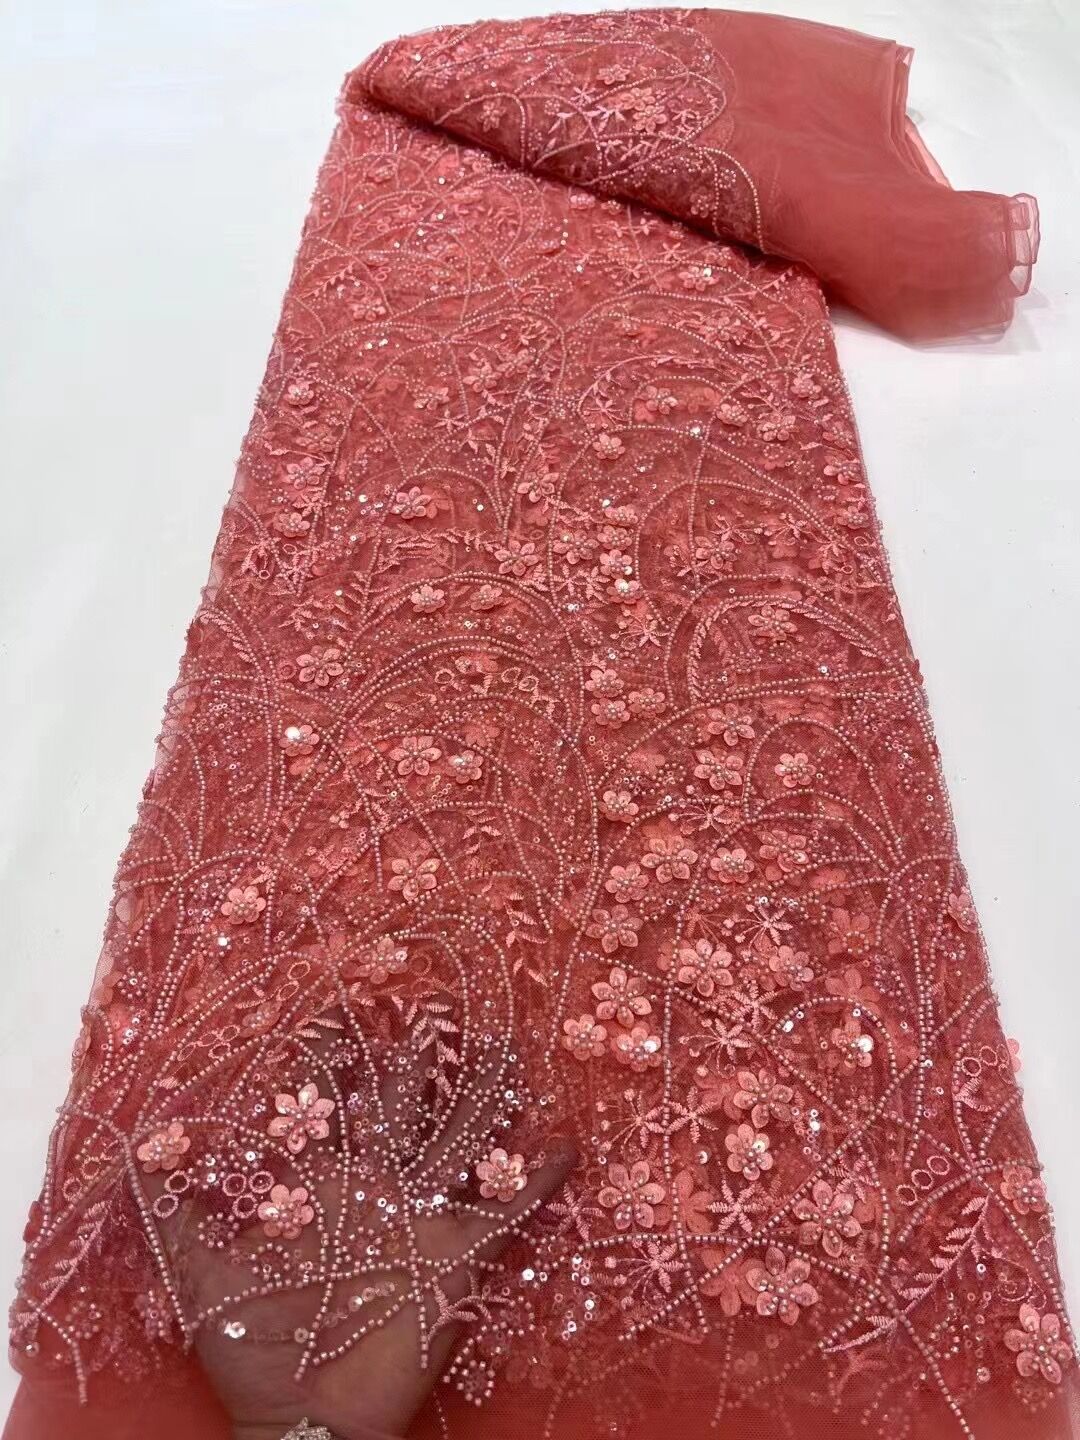 5 YARDS / 16 COLORS / Delphine Sequin Beaded Embroidered  Mesh Sparkly Lace Bridal Wedding Party Dress Fabric